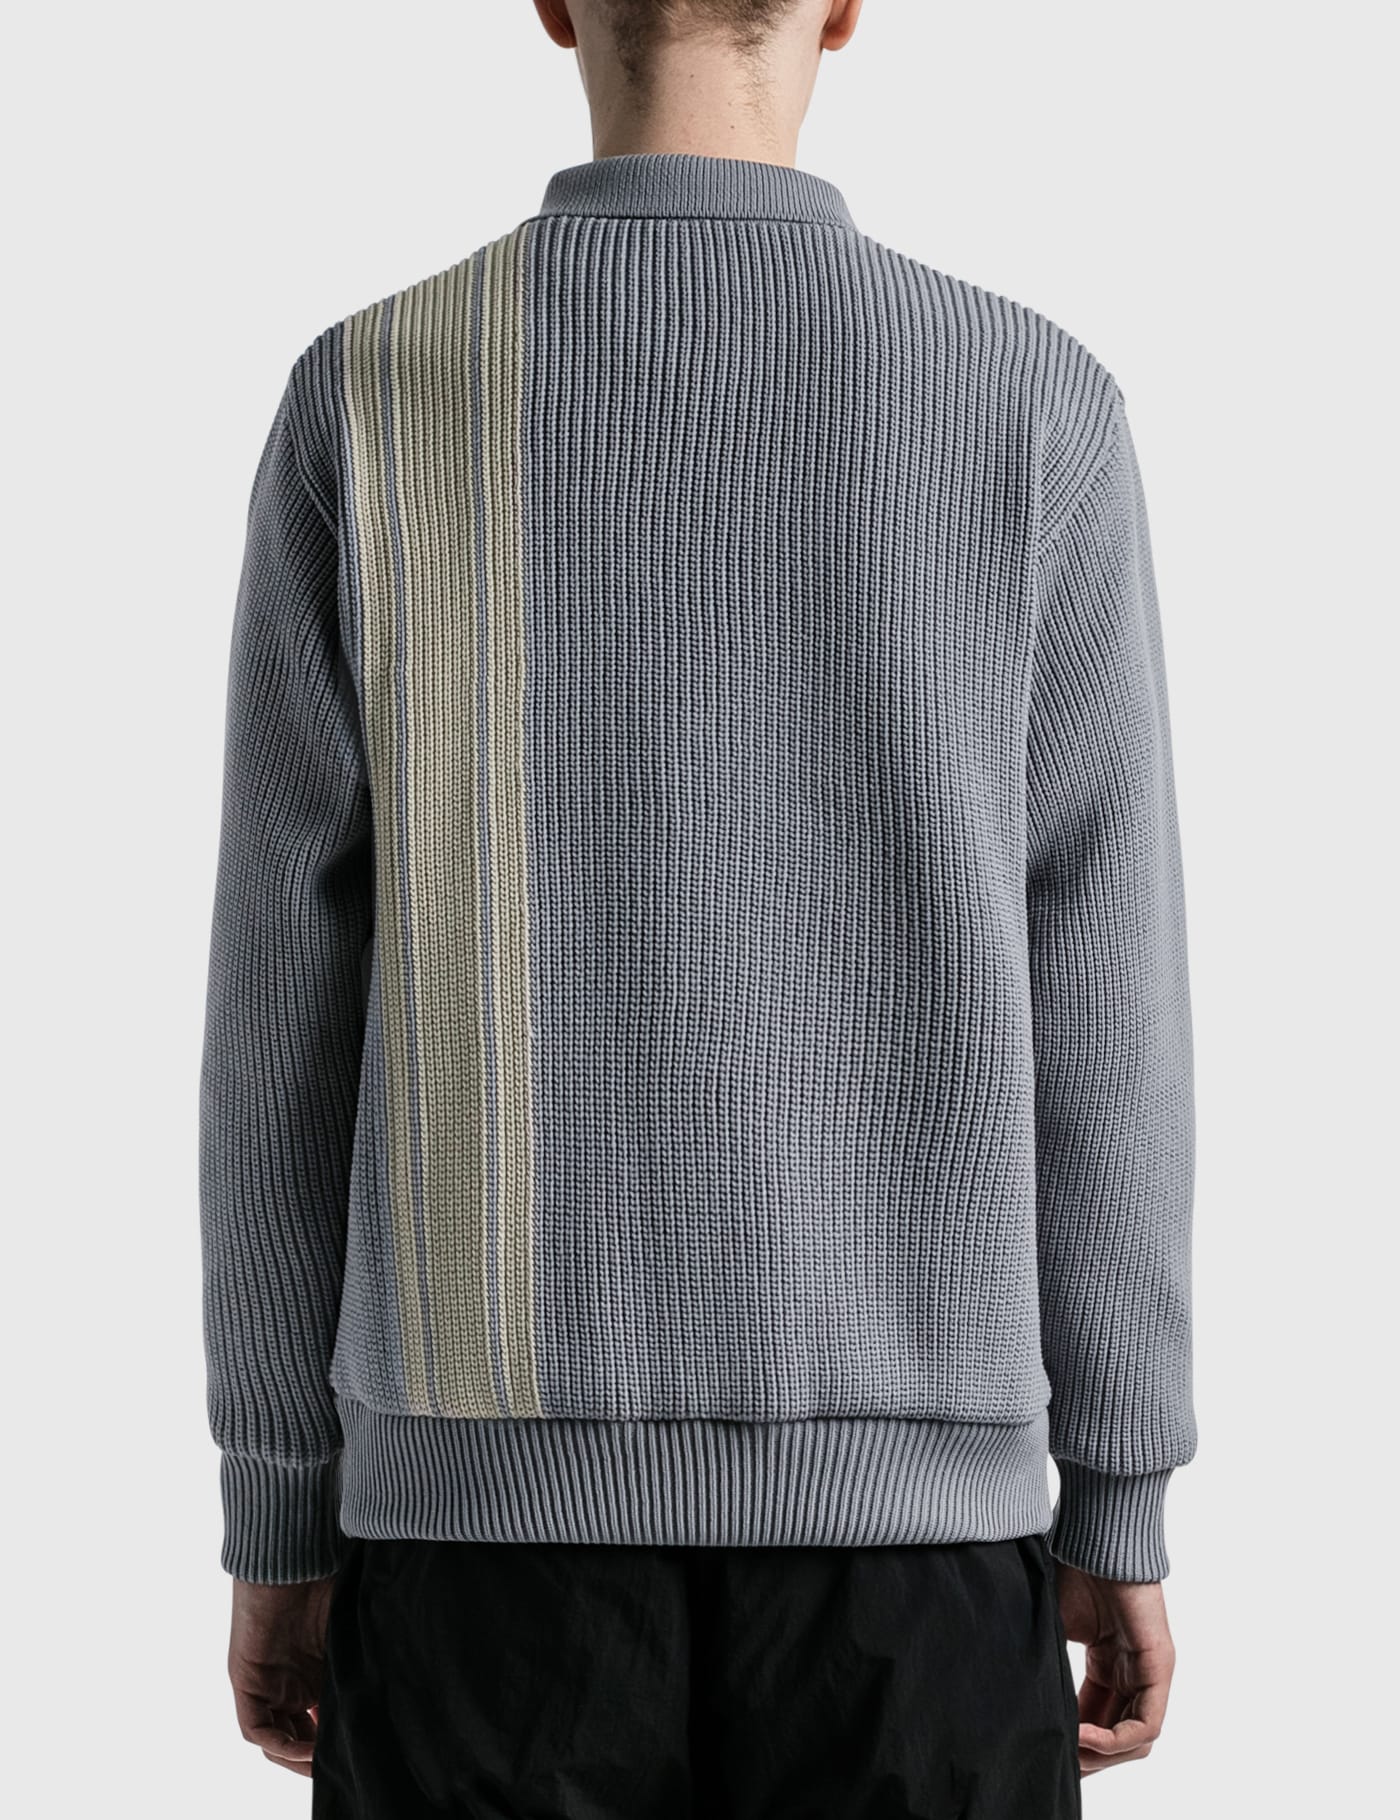 CarService - Racing Knit Jacket | HBX - Globally Curated Fashion